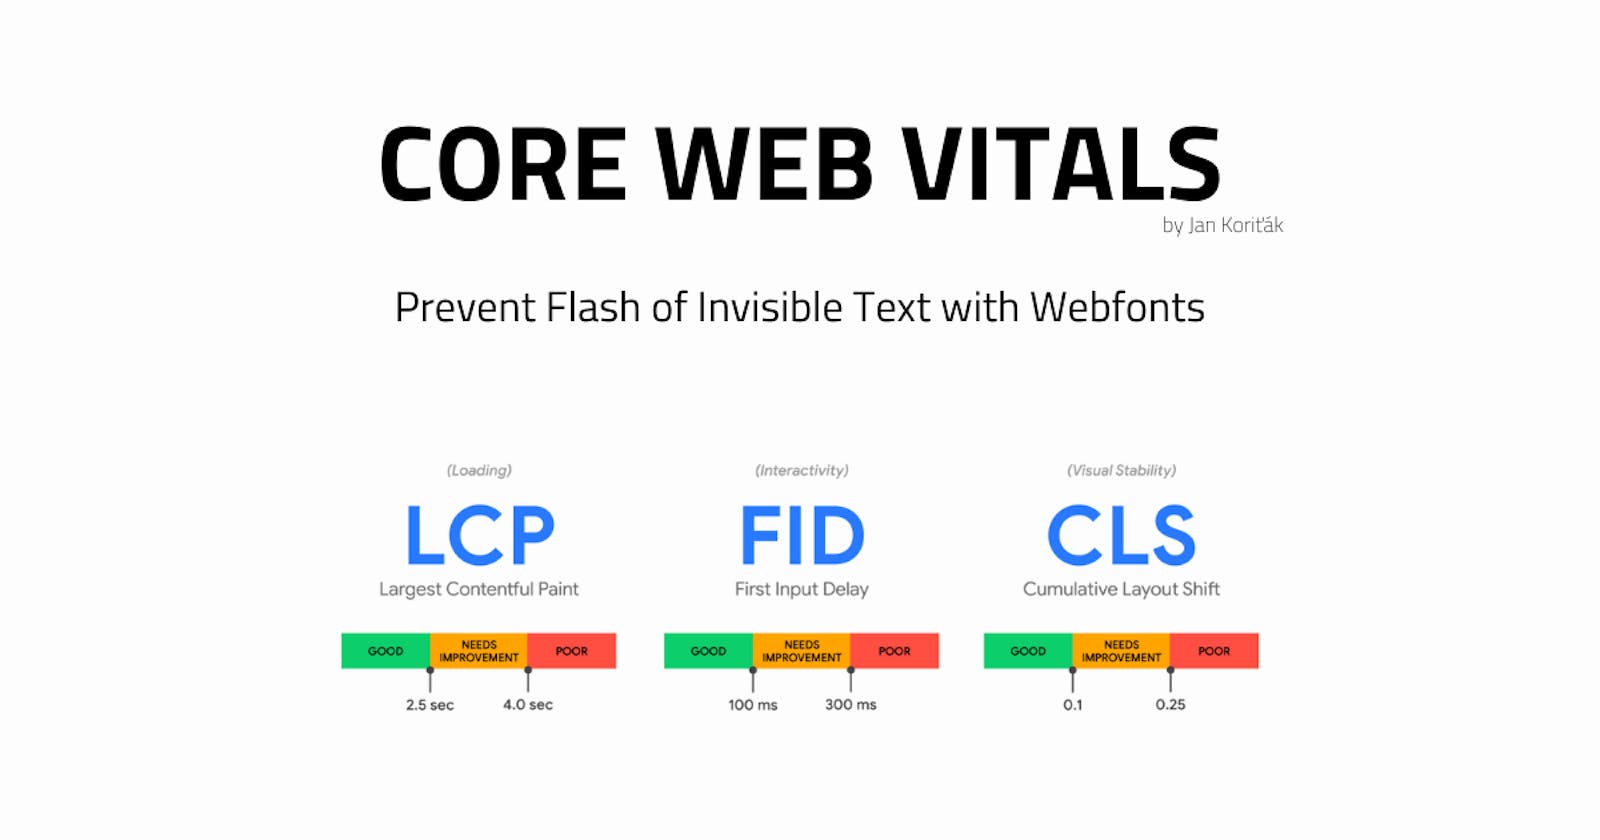 How to prevent Flash of Invisible Text with Webfonts